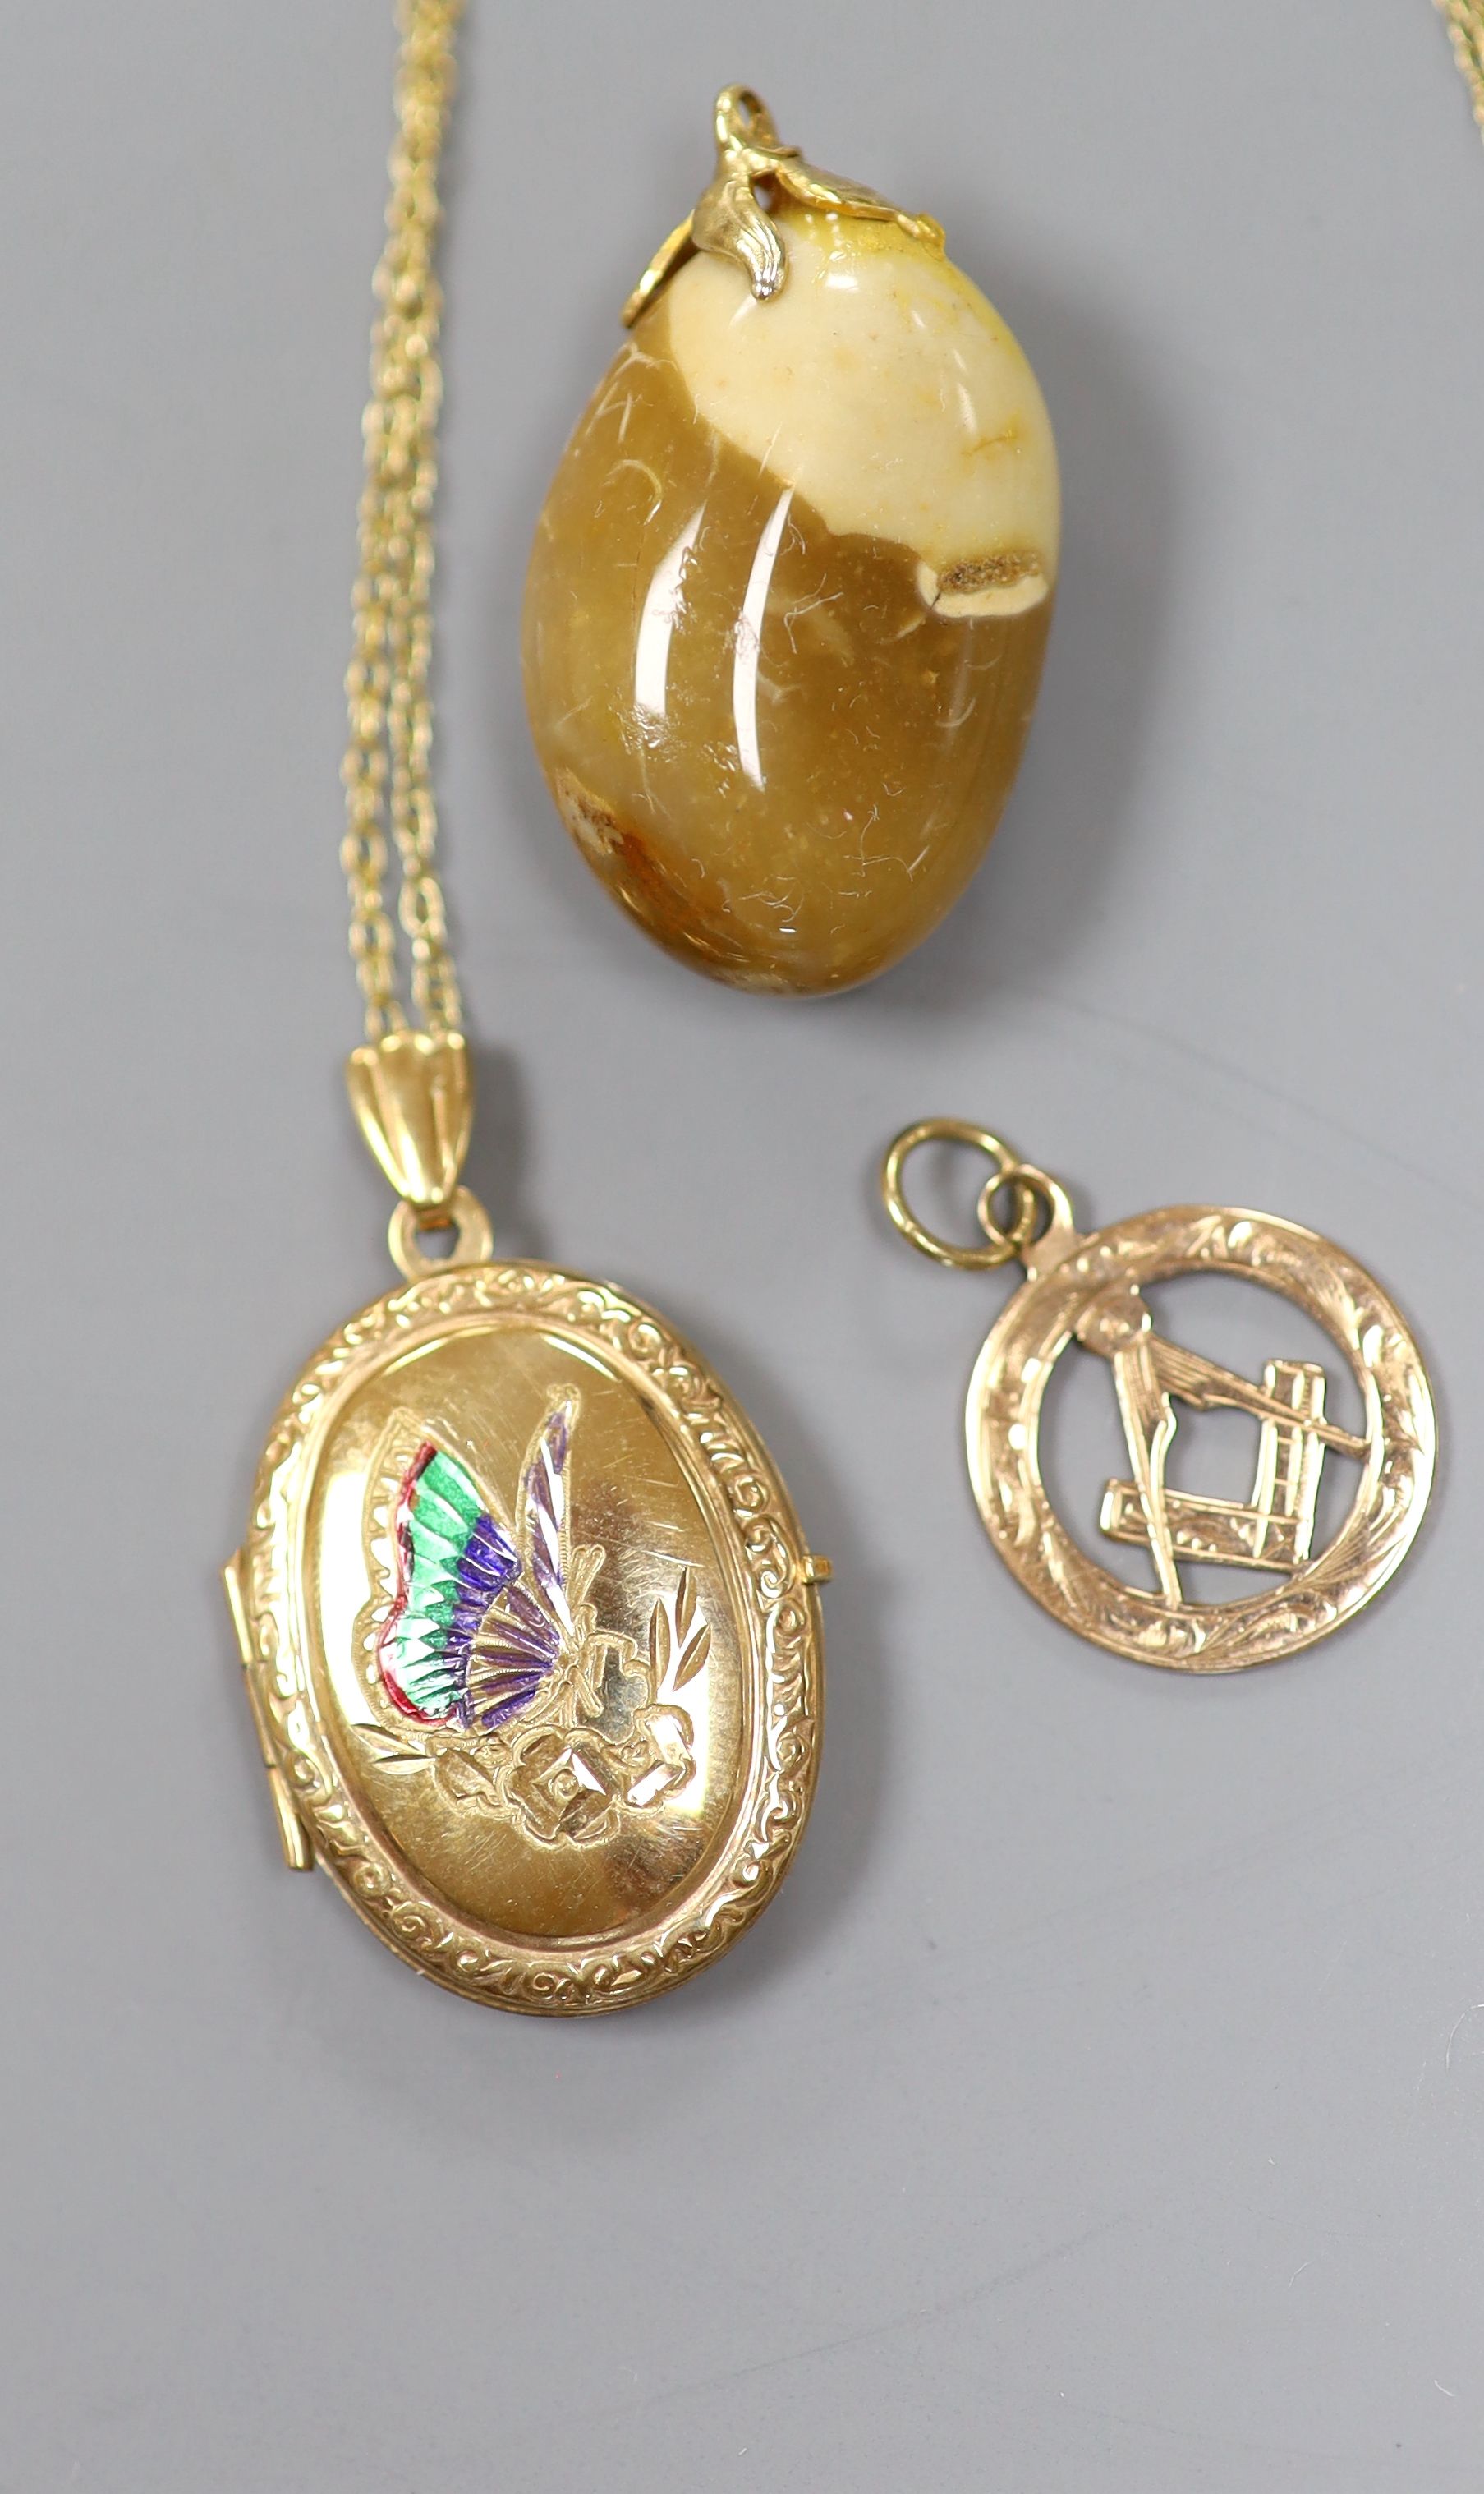 A 9ct gold Masonic watch fob, a 9ct gold locket and a hardstone pendant